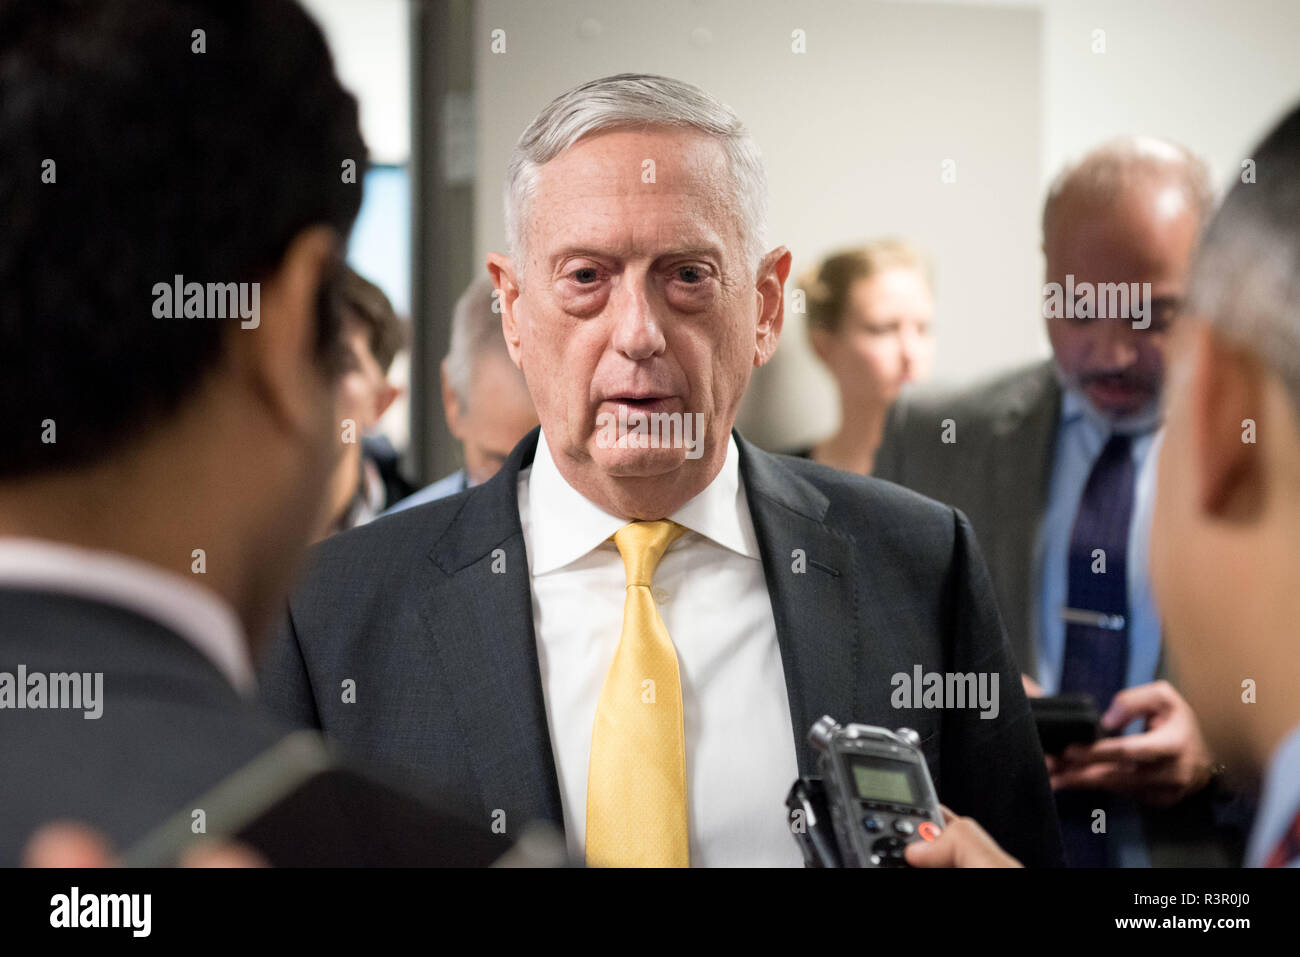 U.S. Secretary of Defense James N. Mattis speaks to reporters at the Pentagon in Washington, D.C., Nov. 21, 2018. (DoD photo by Army Sgt. Amber I. Smith) Stock Photo